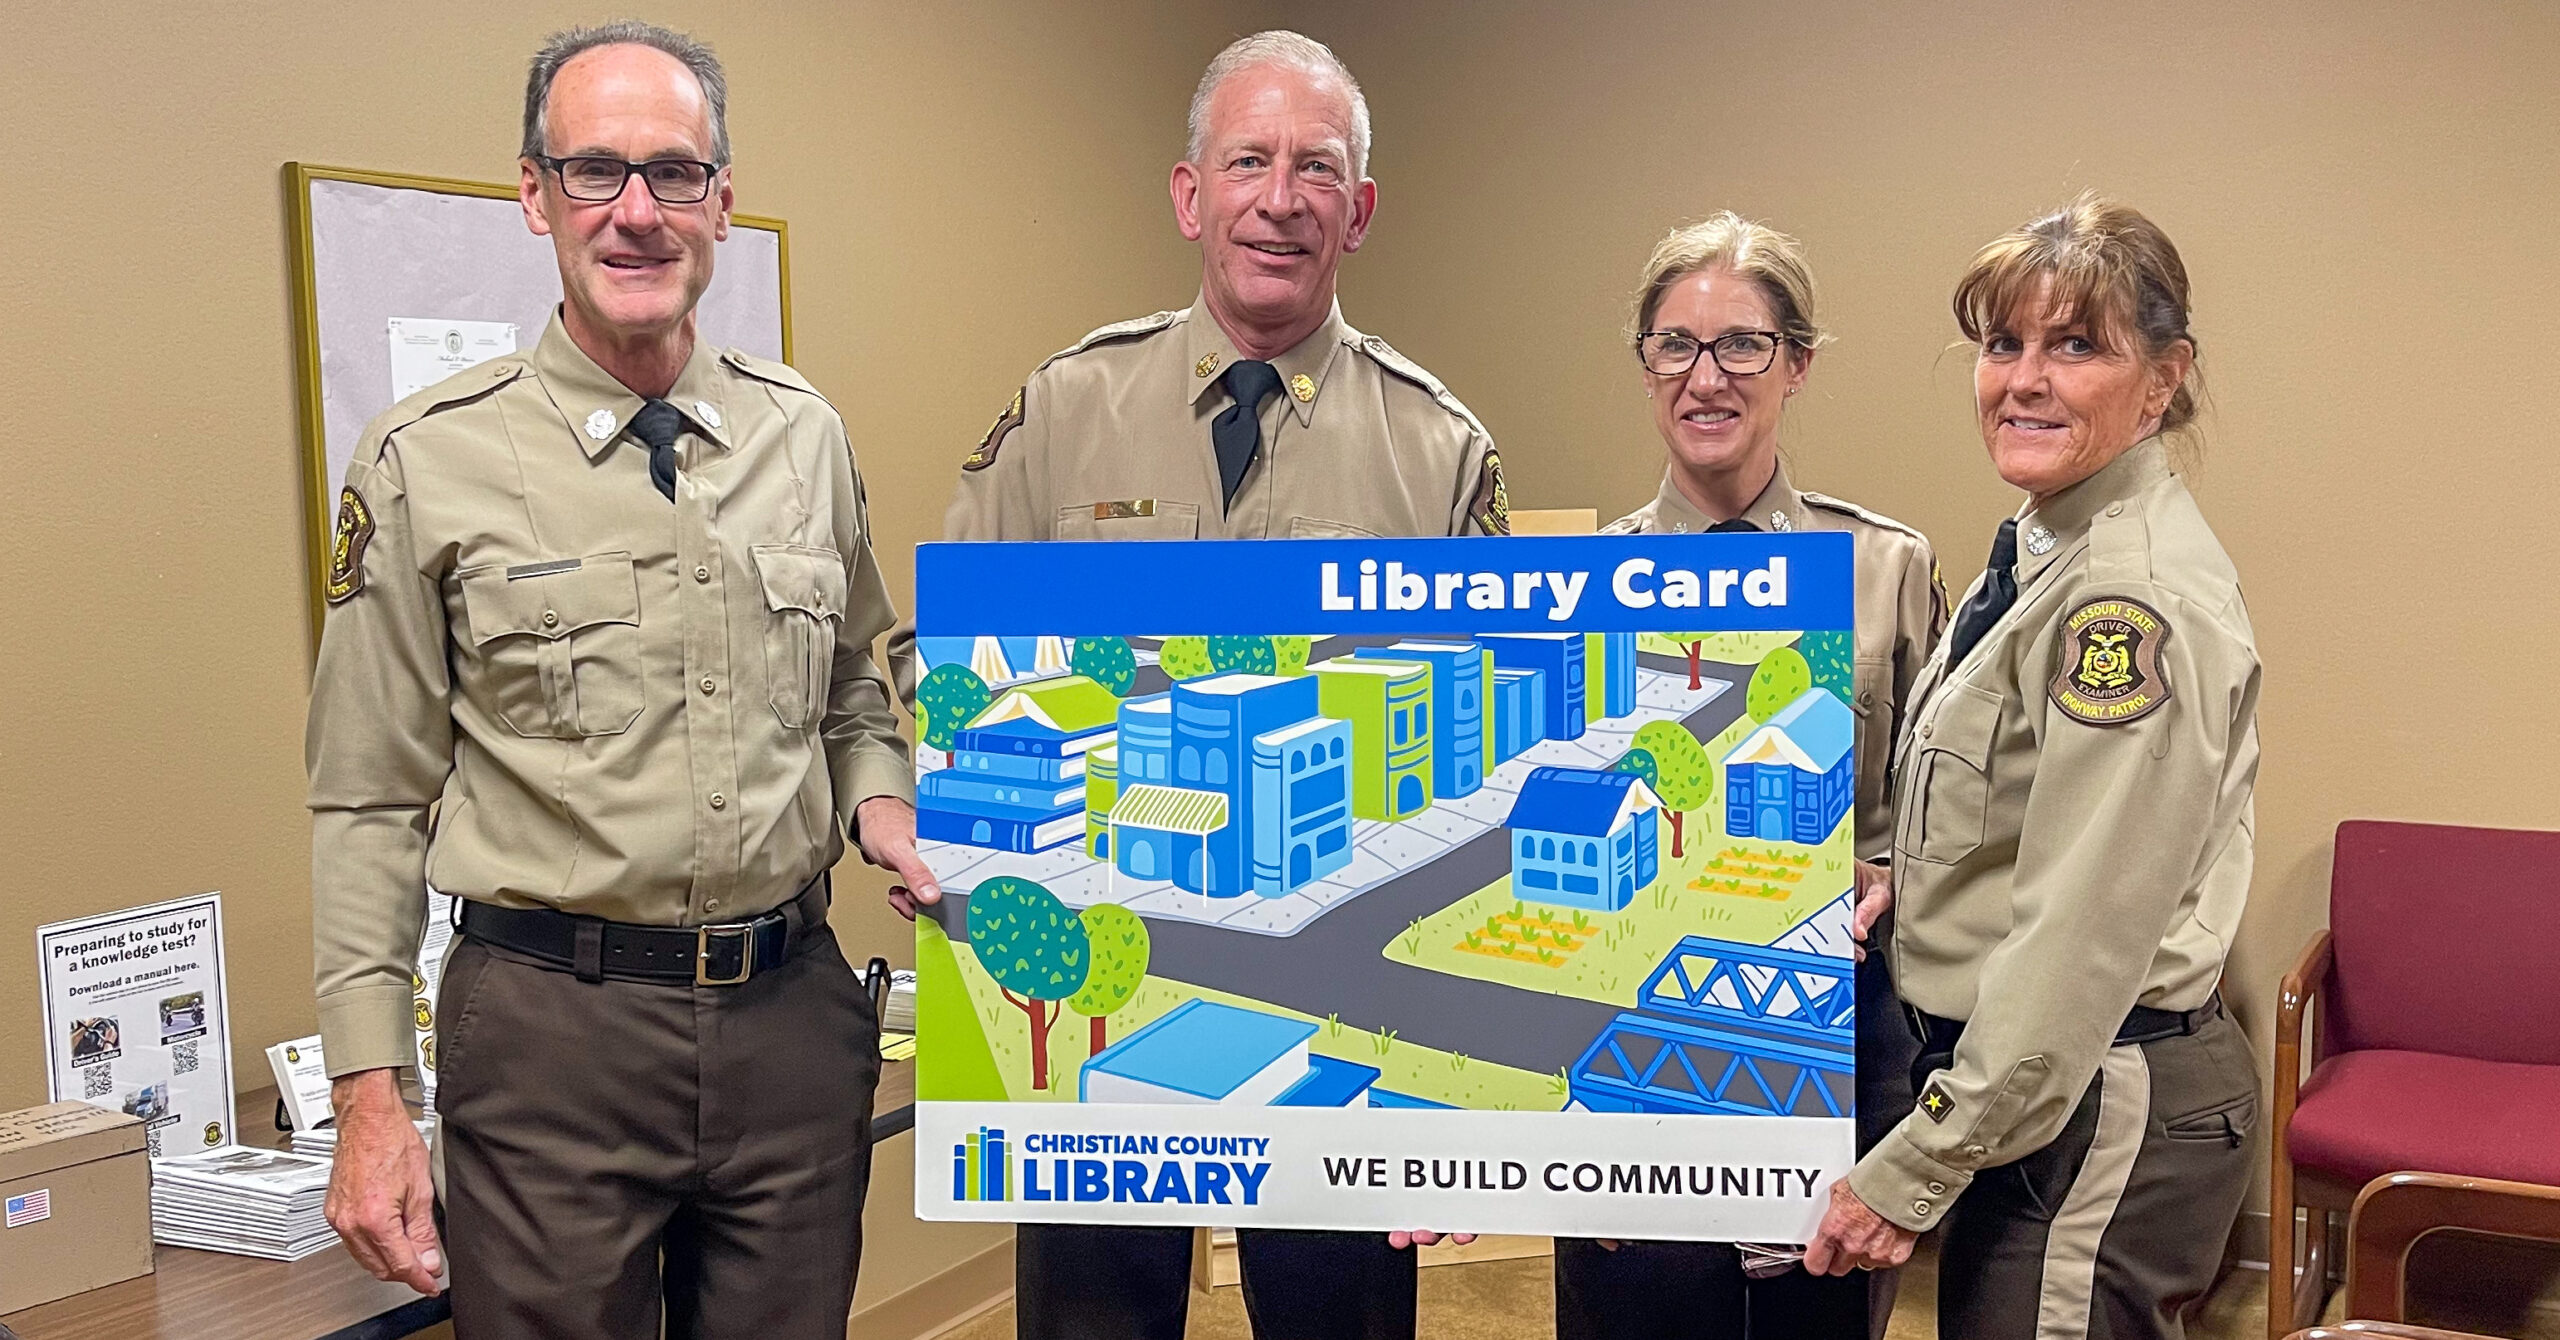 Four highway patrol officers hold an oversized Christian County Library card.